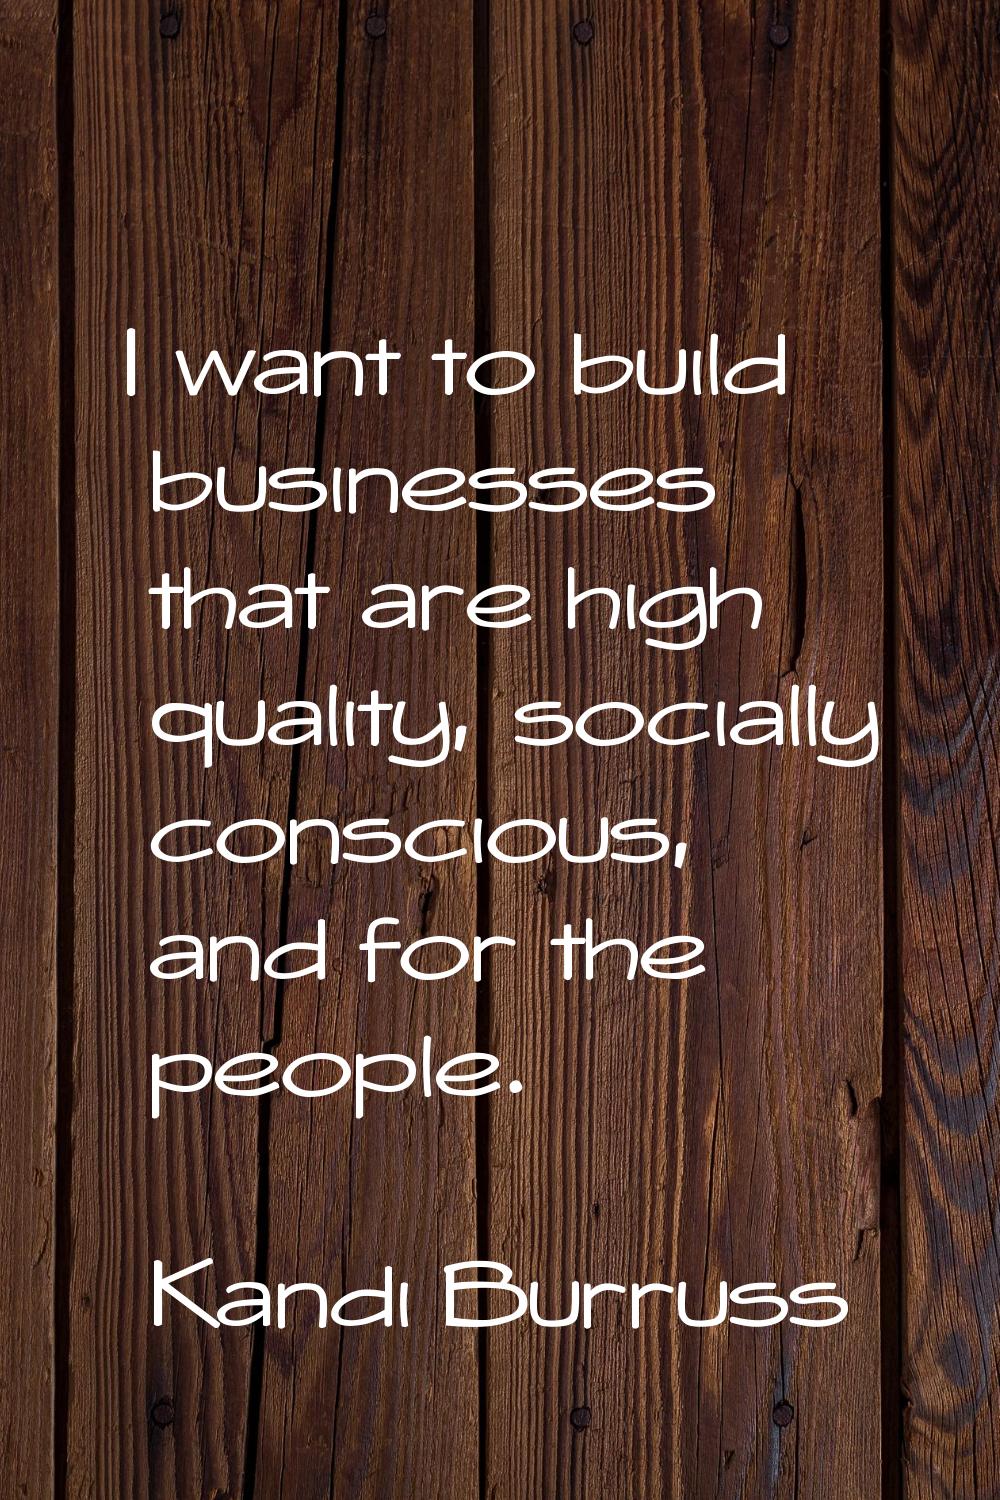 I want to build businesses that are high quality, socially conscious, and for the people.